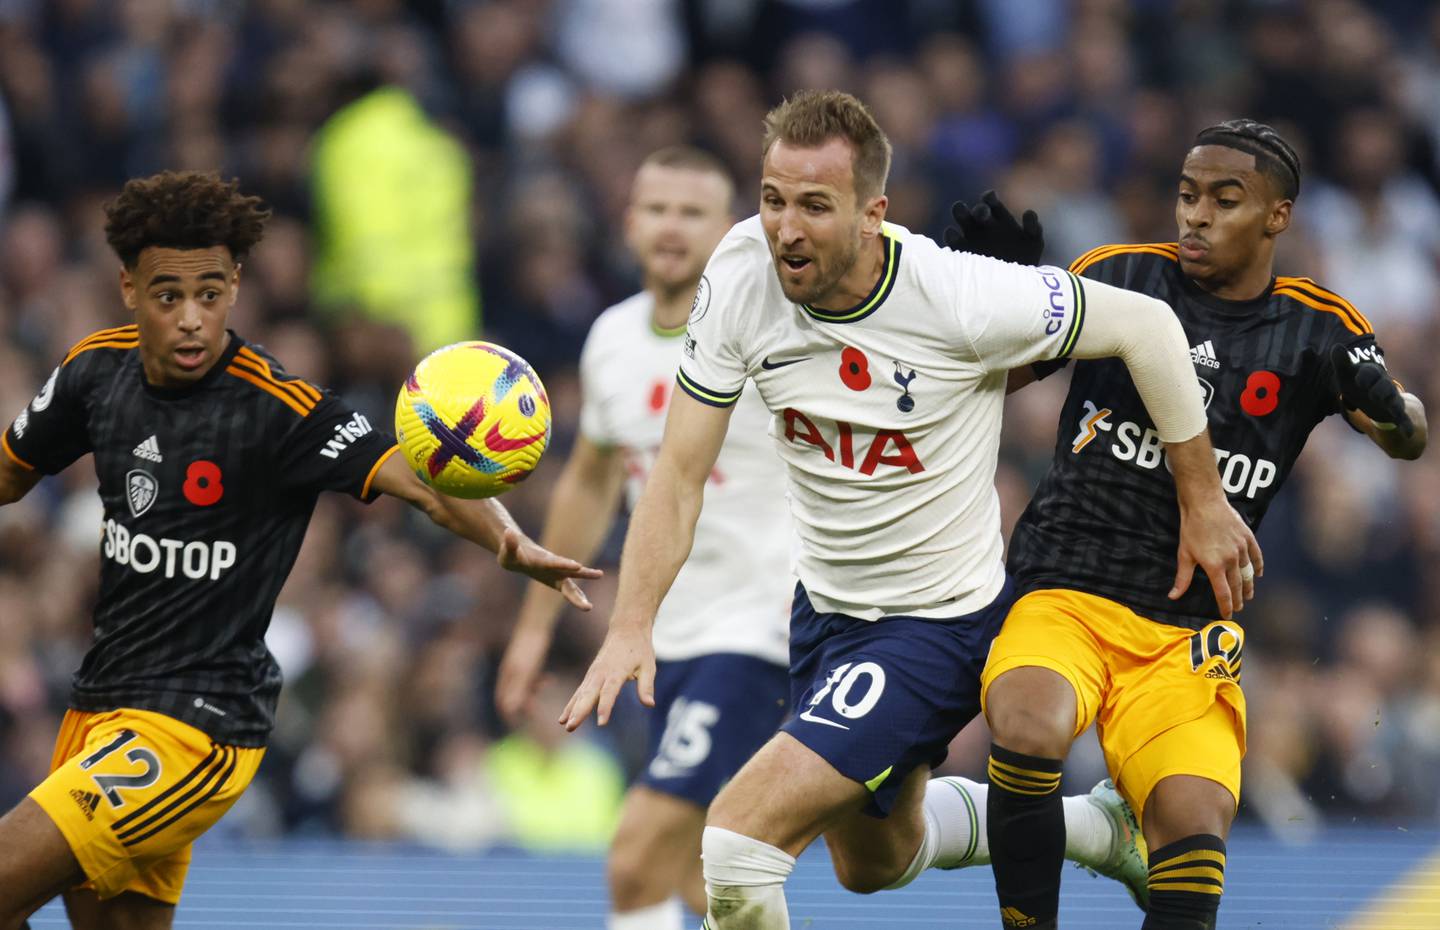 Tottenham's Harry Kane, center, duels for the ball with Leeds United's Crysencio Summerville during an English Premier League match Nov. 12, 2022, in London.